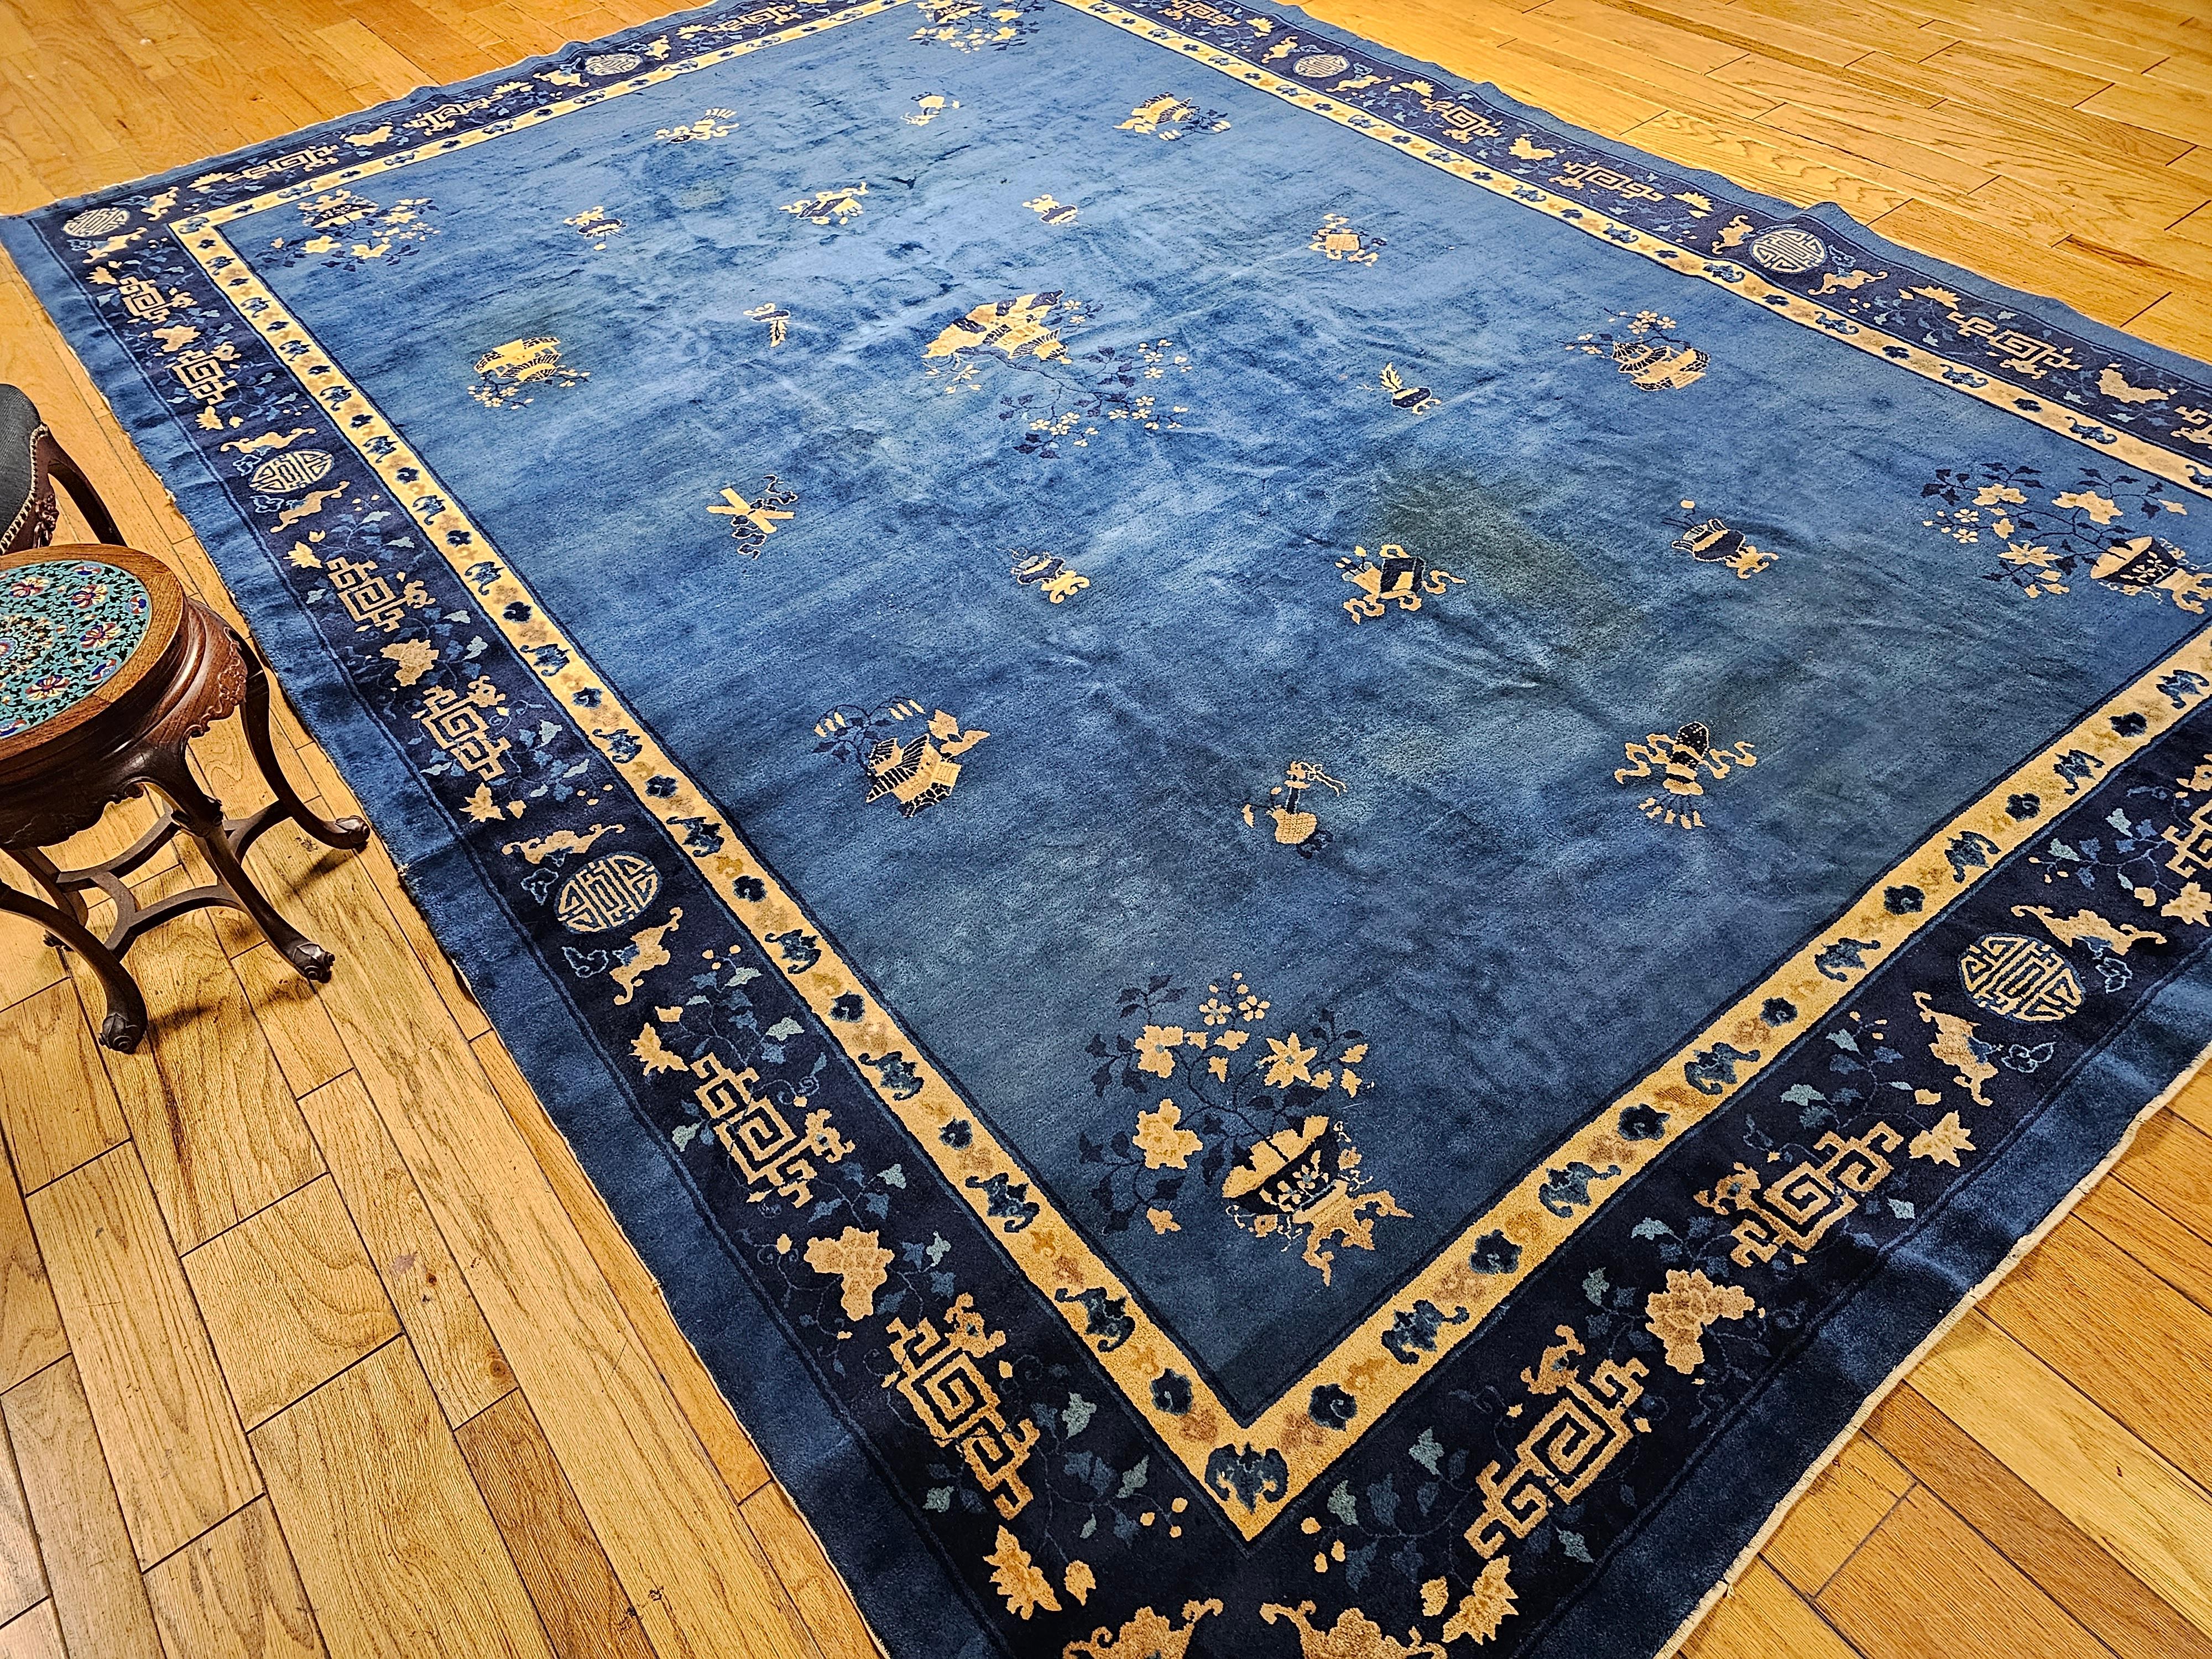 Vintage Art Deco Chinese Rug with Auspicious Symbols in Royal Blue, Navy, Camel For Sale 6